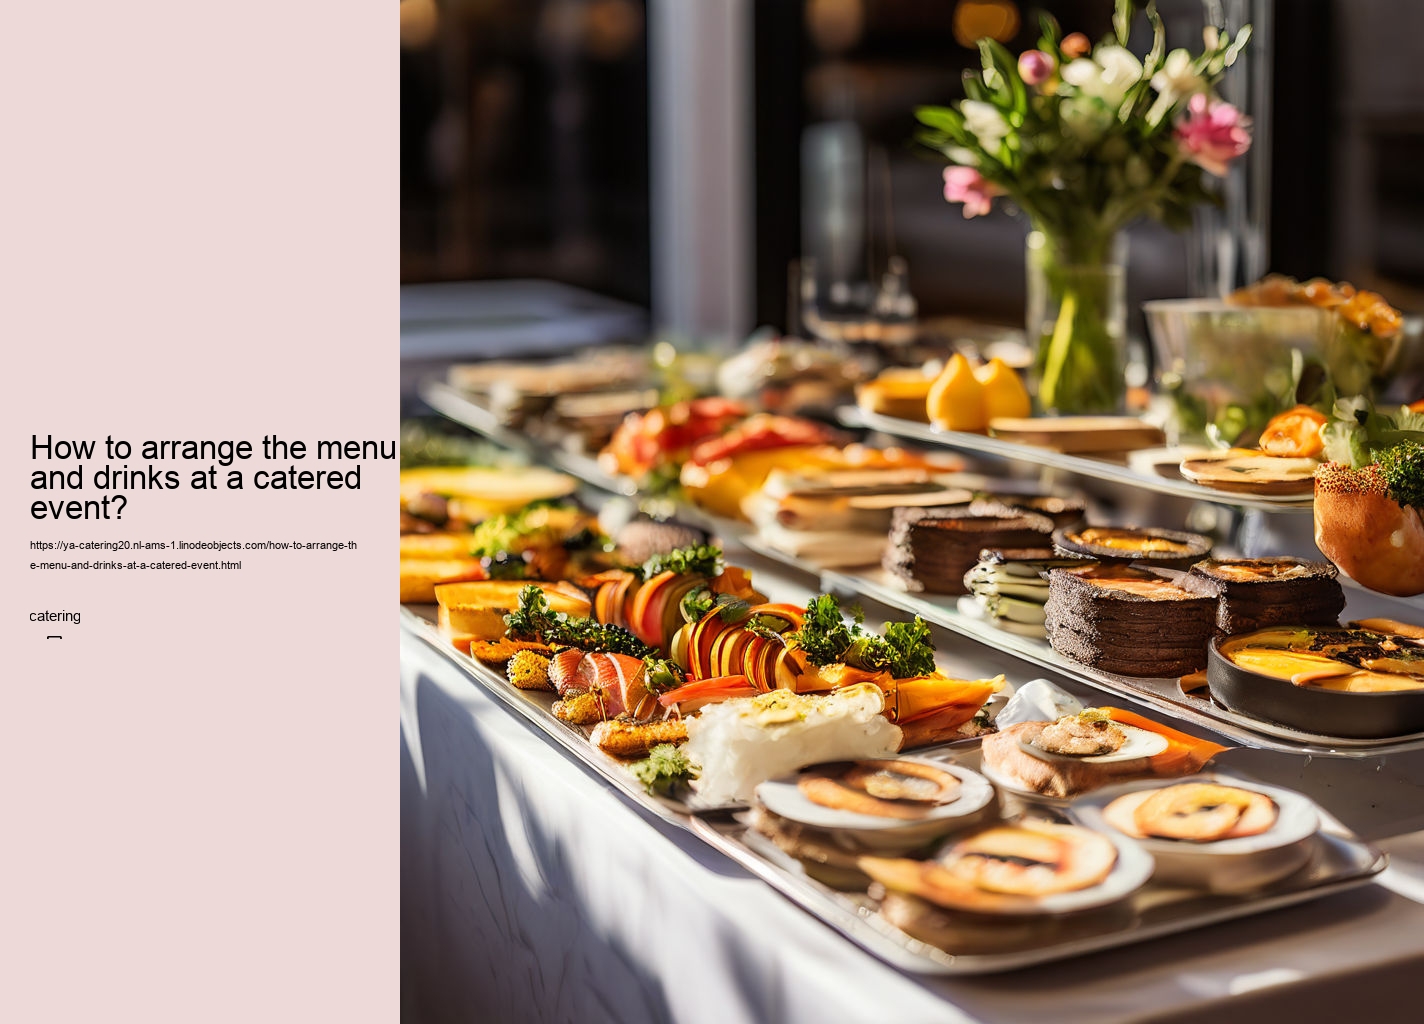 How to arrange the menu and drinks at a catered event?